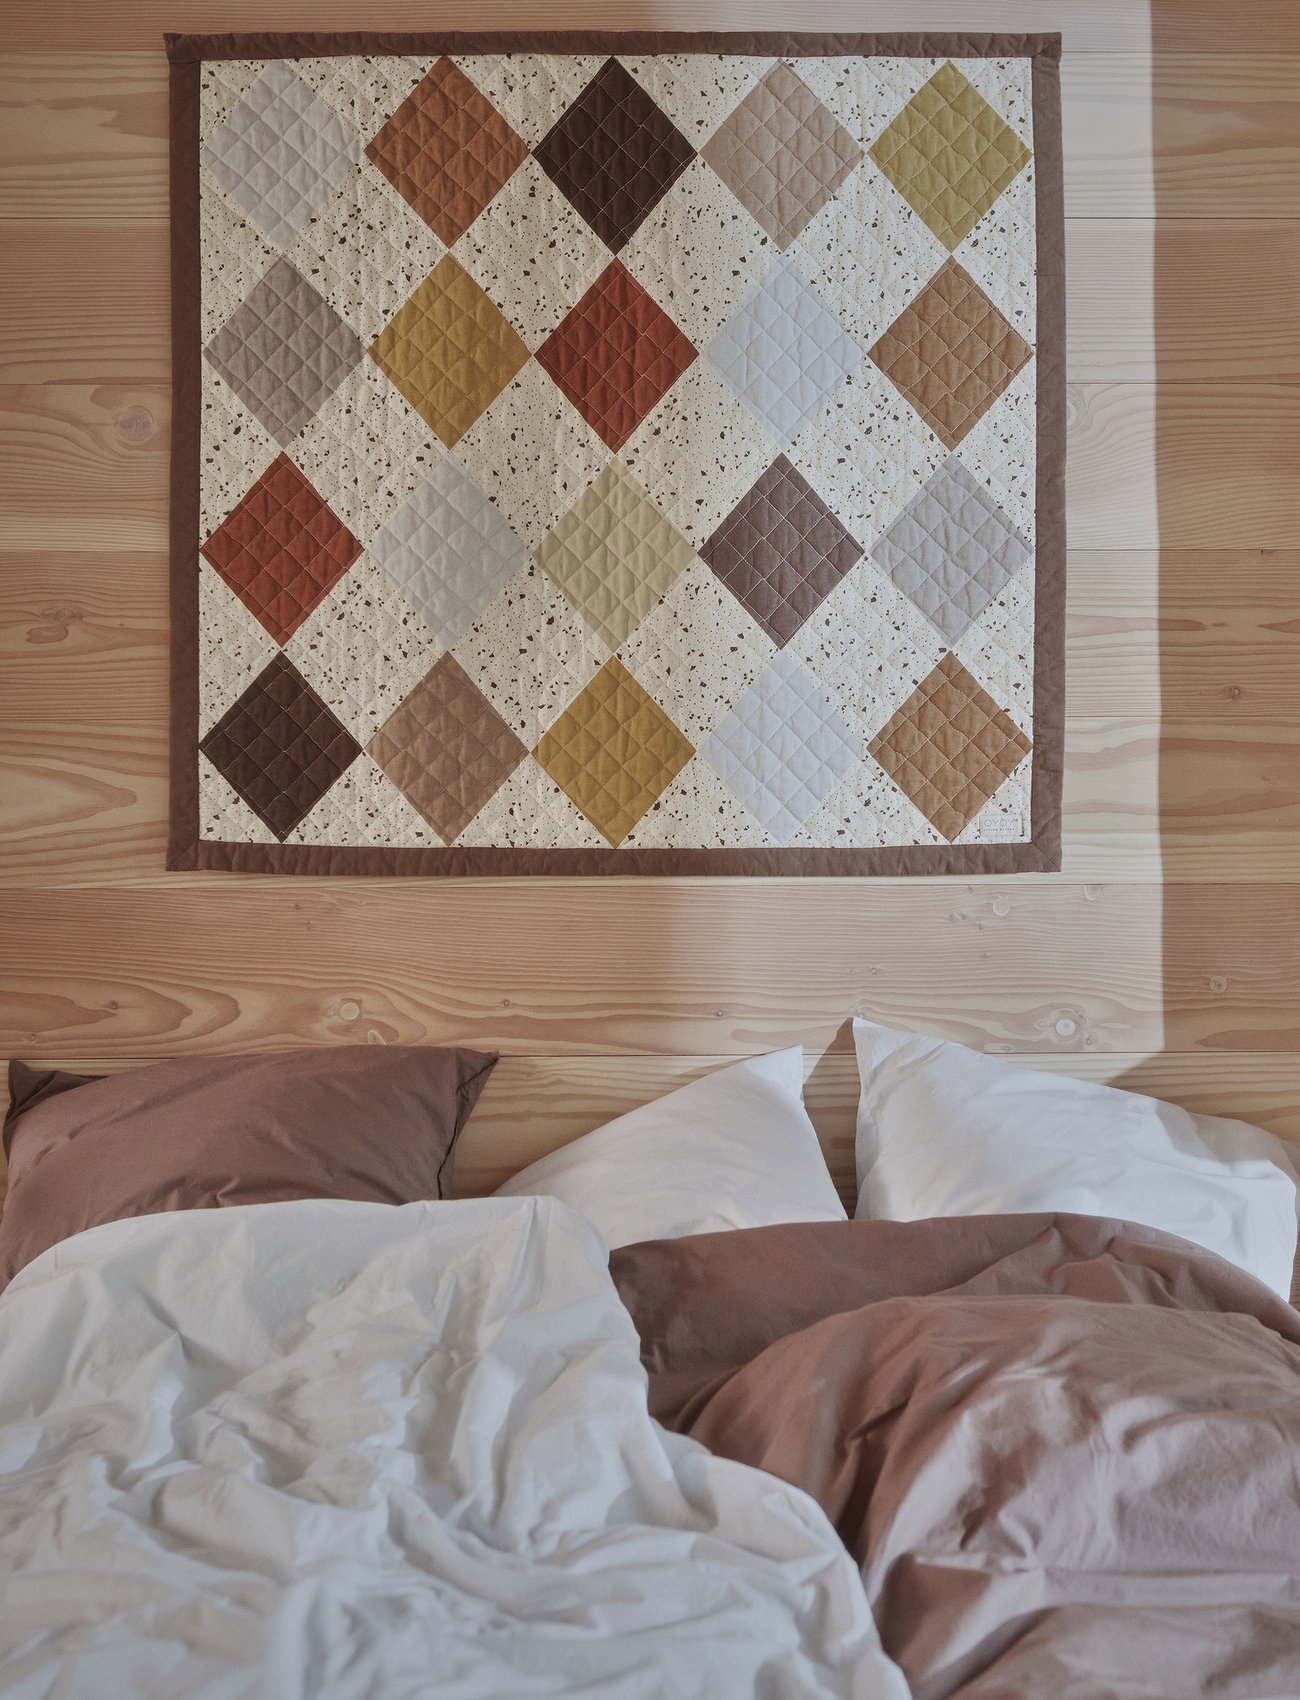 OYOY Living Design - Quilted Aya Wall Rug - Large - wand-deko - brown - 1